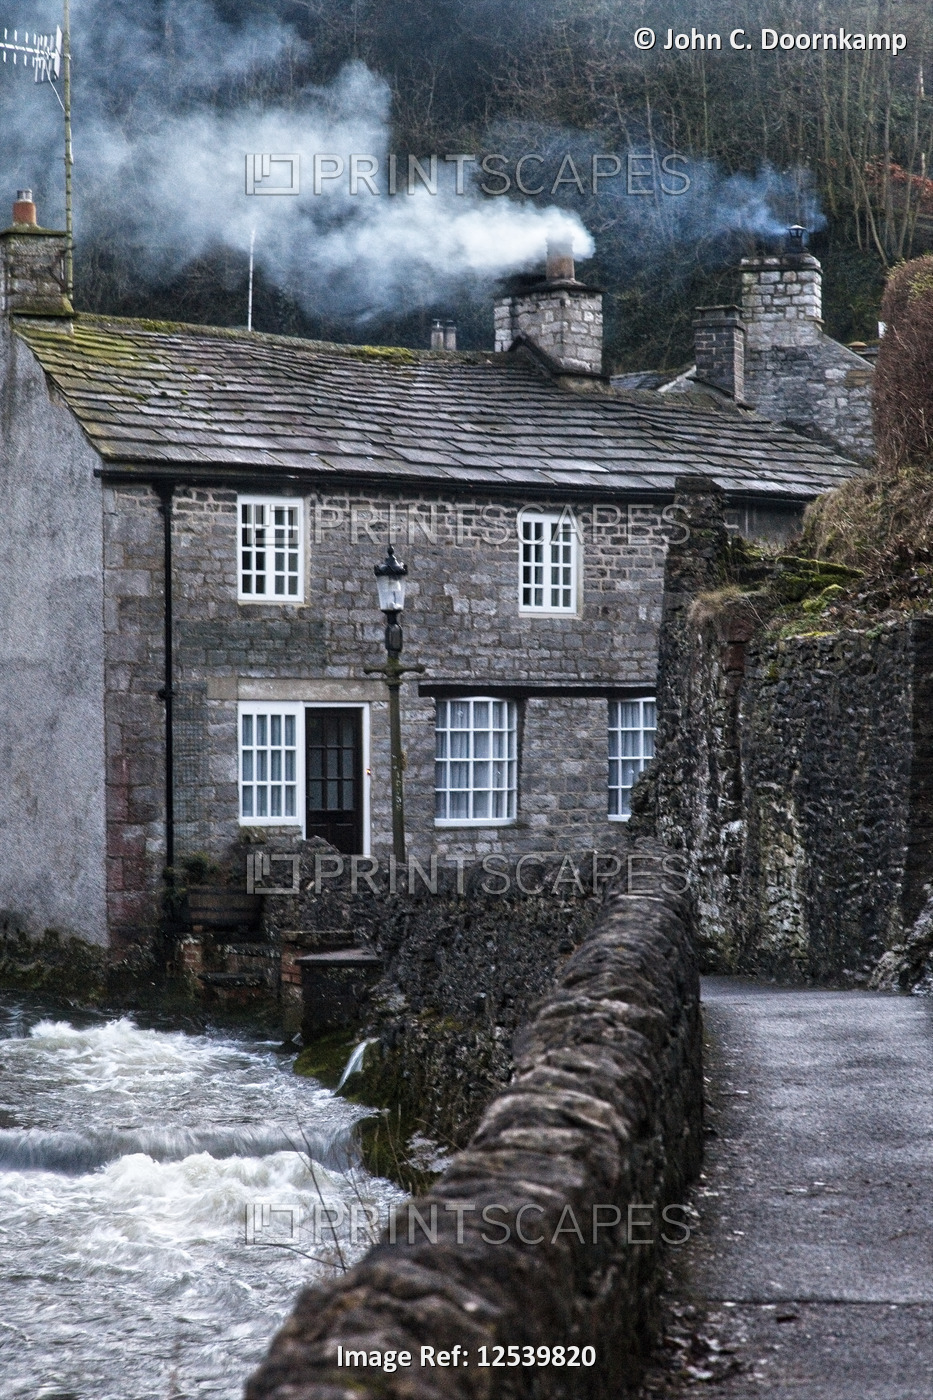 URBAN SCENE OF A GREY STONE HOUSE WITH SMOKE COMING FROM ITS CHIMNEY